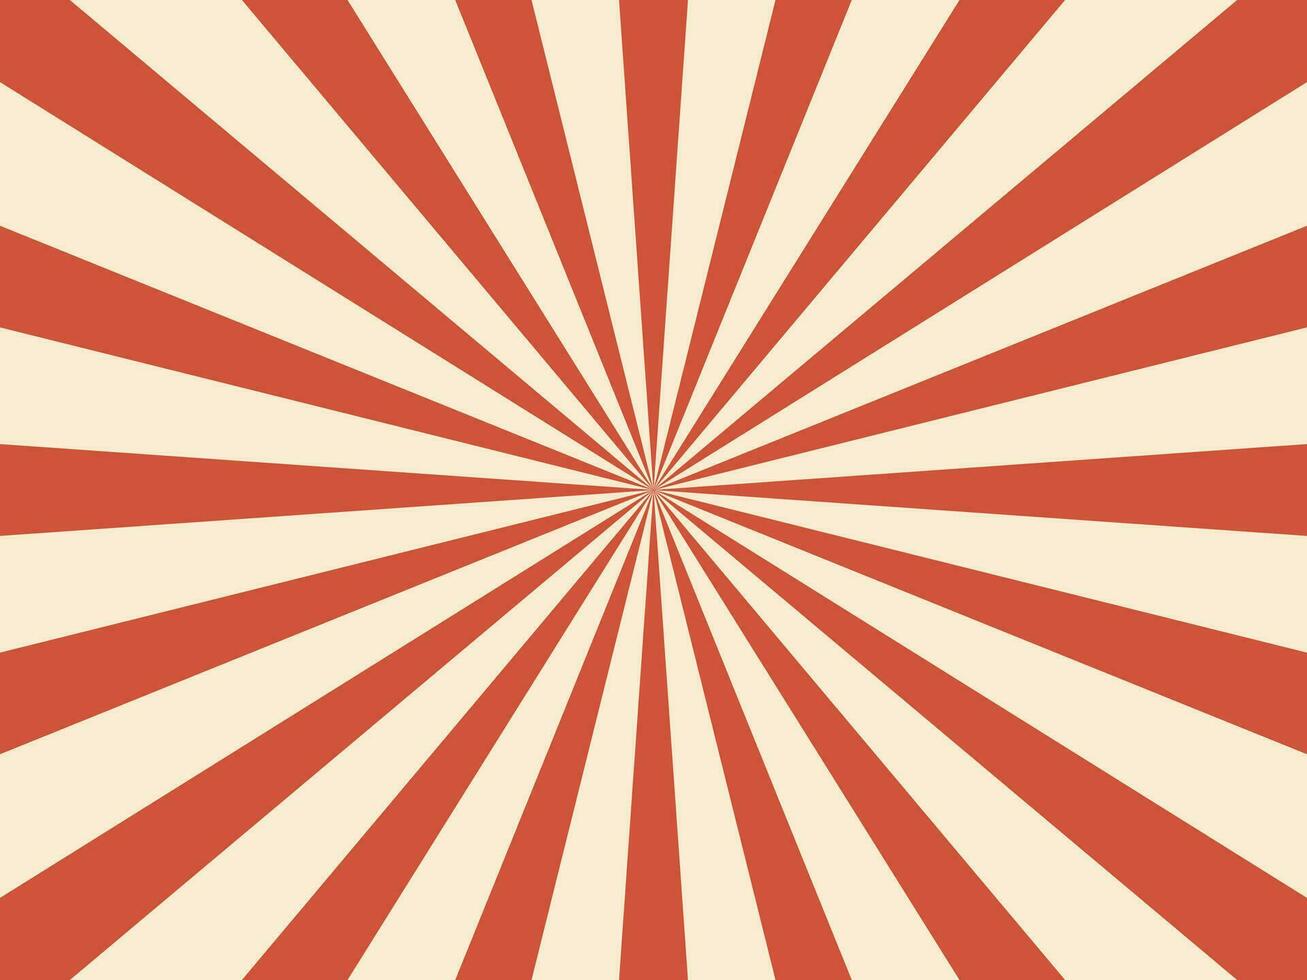 Carnival stripe or retro circus rays background vector